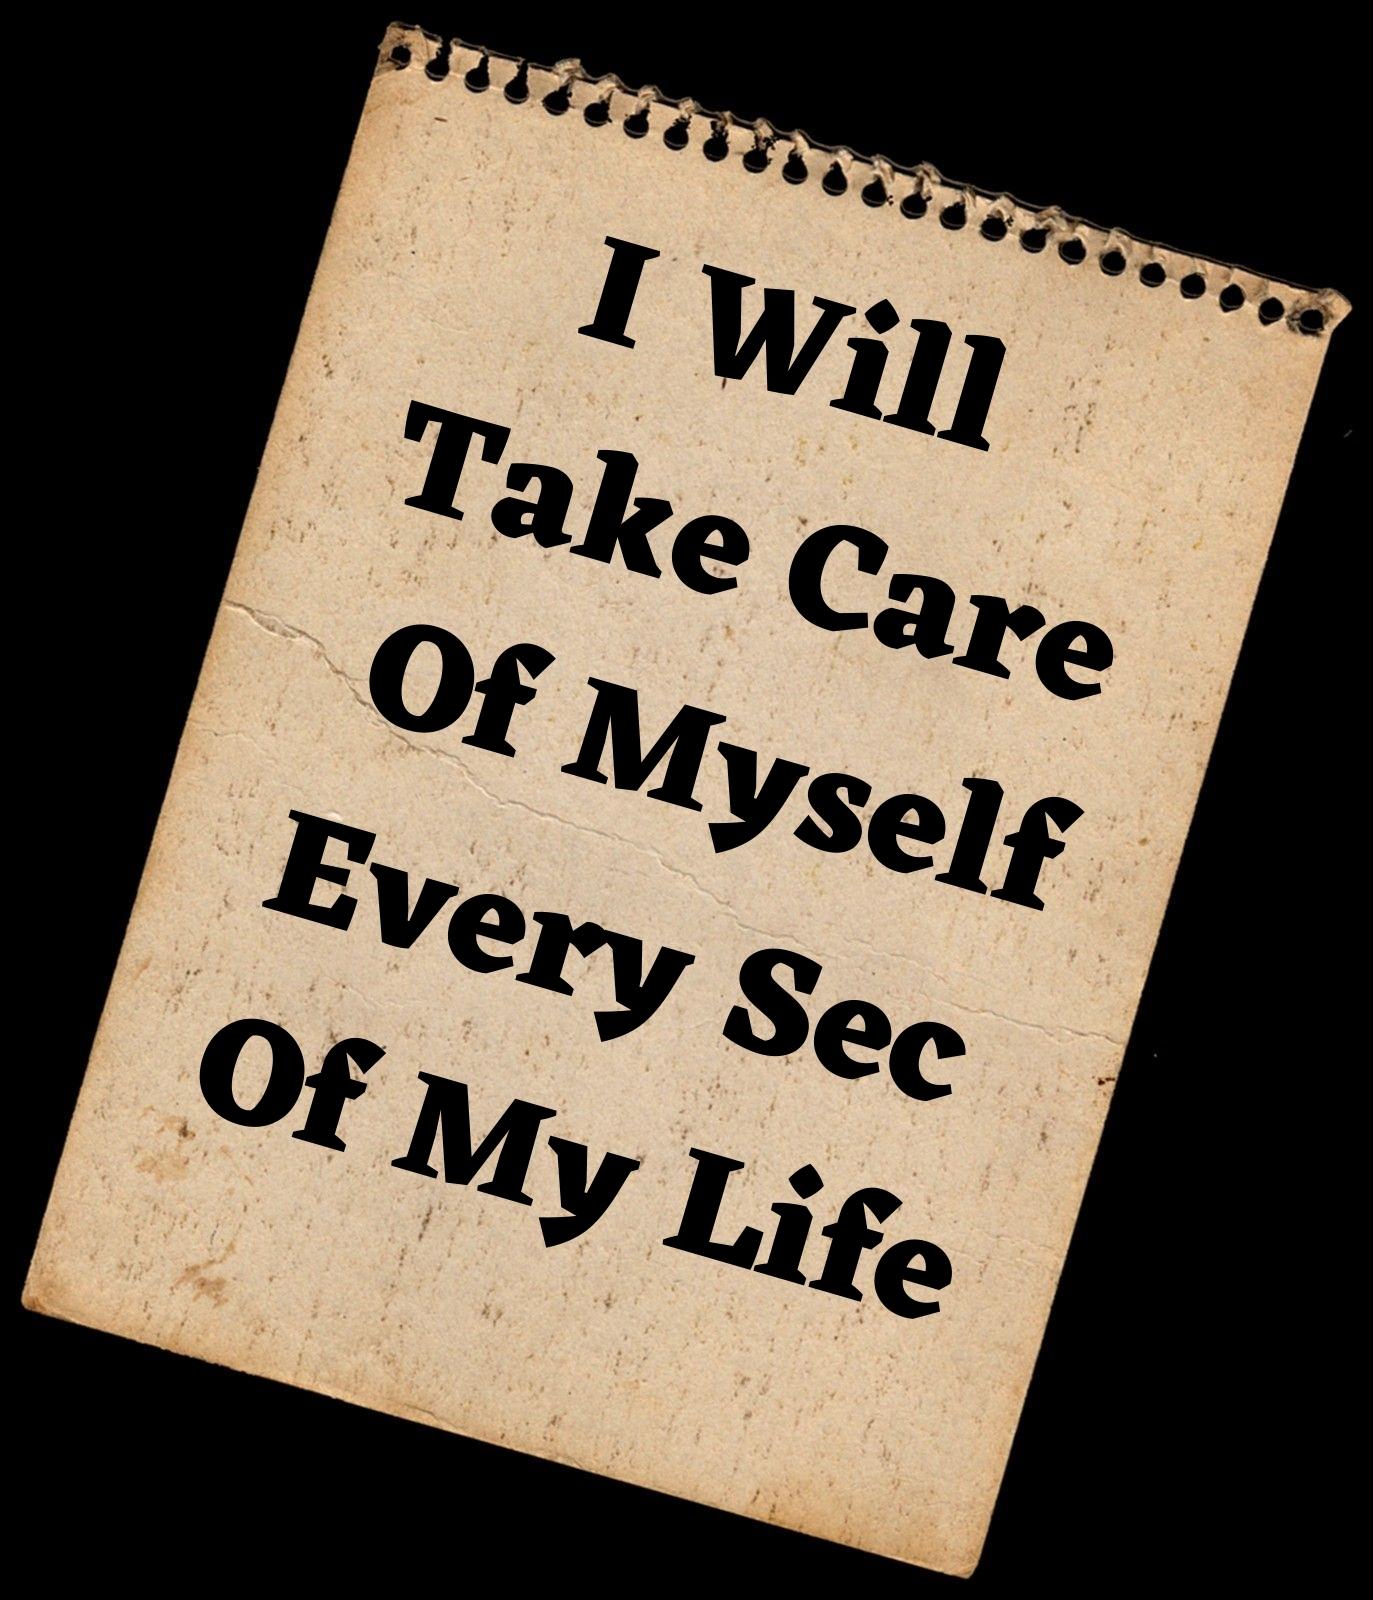 I WILL TAKE CARE OF MYSELF EVERY SEC OF MY LIFE.